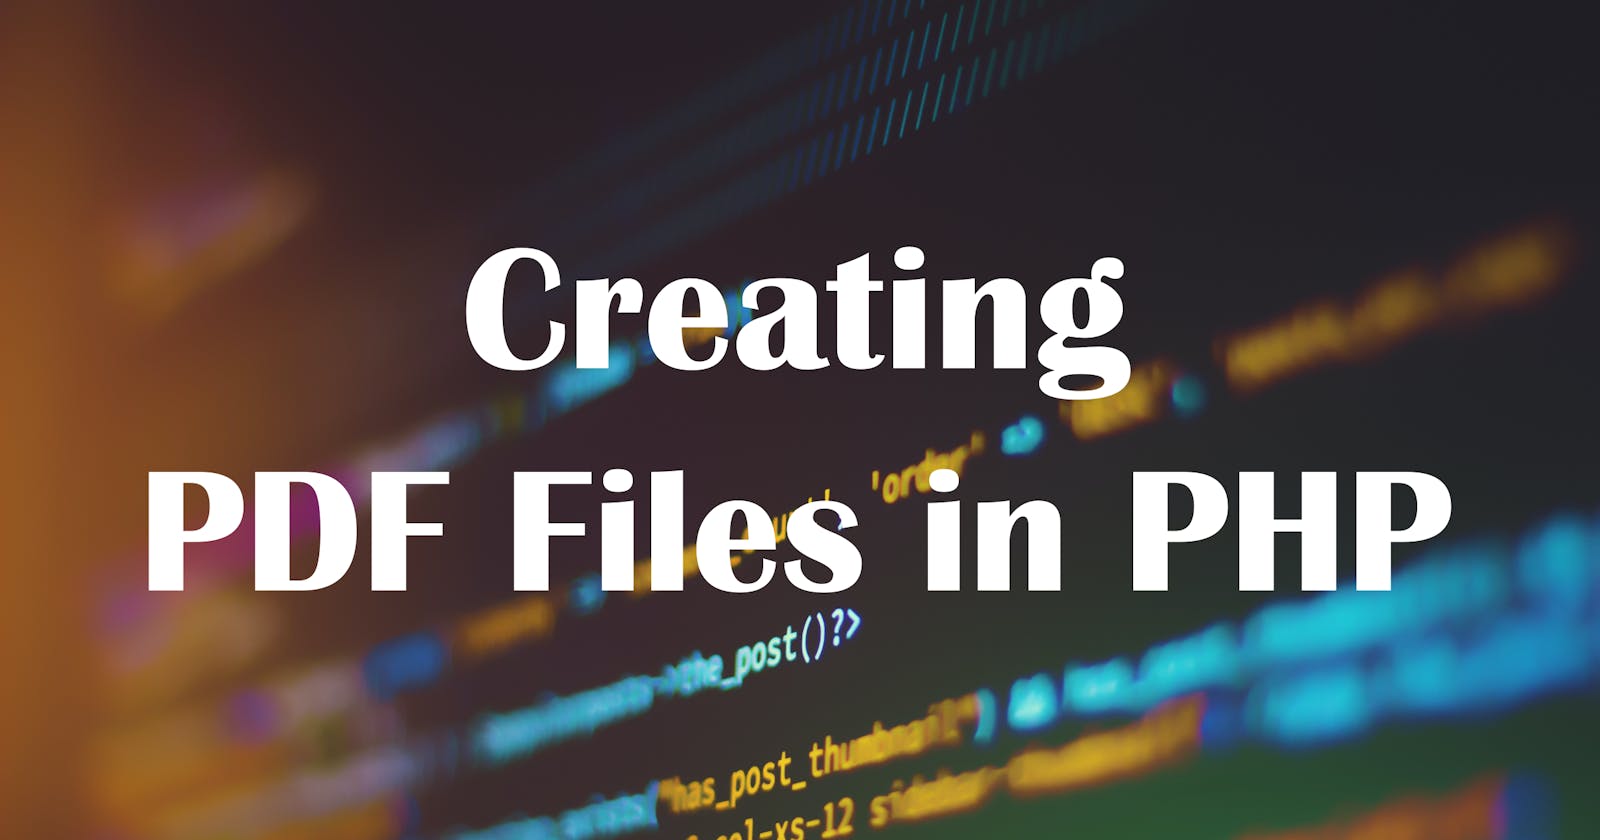 Creating PDF Files in PHP by Using the FPDF Library